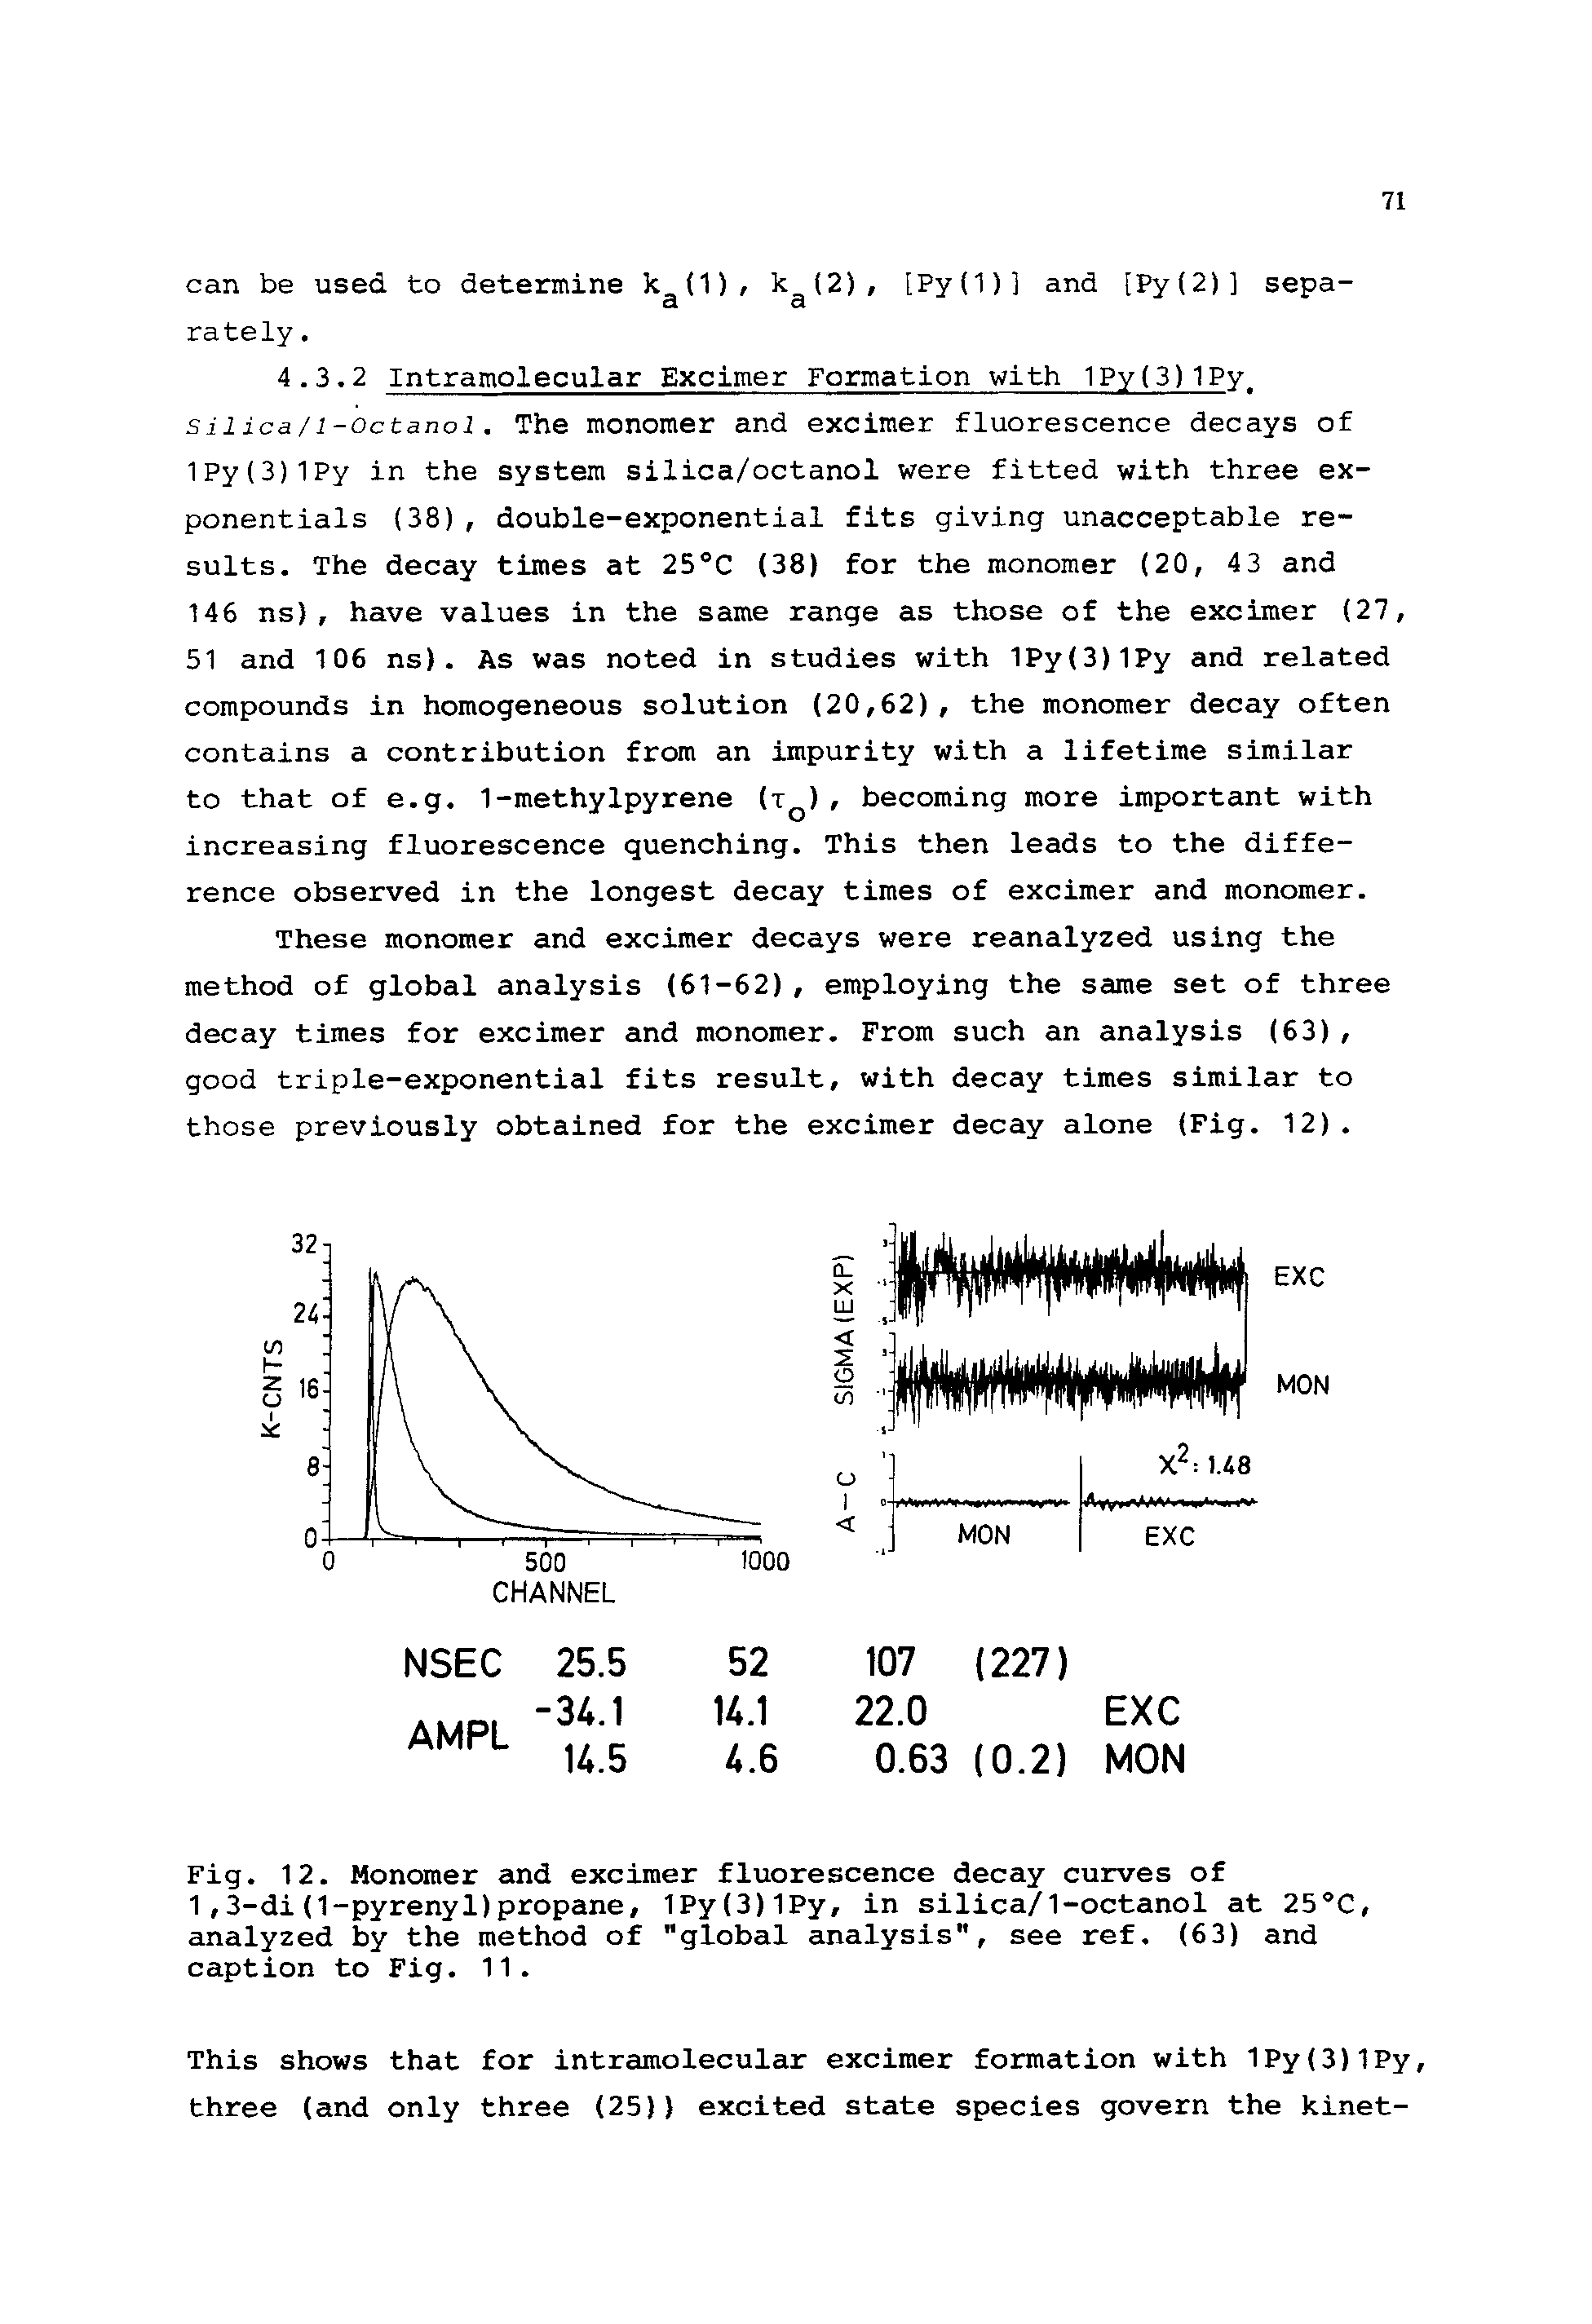 Fig. 12. Monomer and excimer fluorescence decay curves of 1,3-di(1-pyrenyl)propane, 1Py(3)1Py, in silica/1-octanol at 25°C, analyzed by the method of "global analysis", see ref. (63) and caption to Fig. 11.